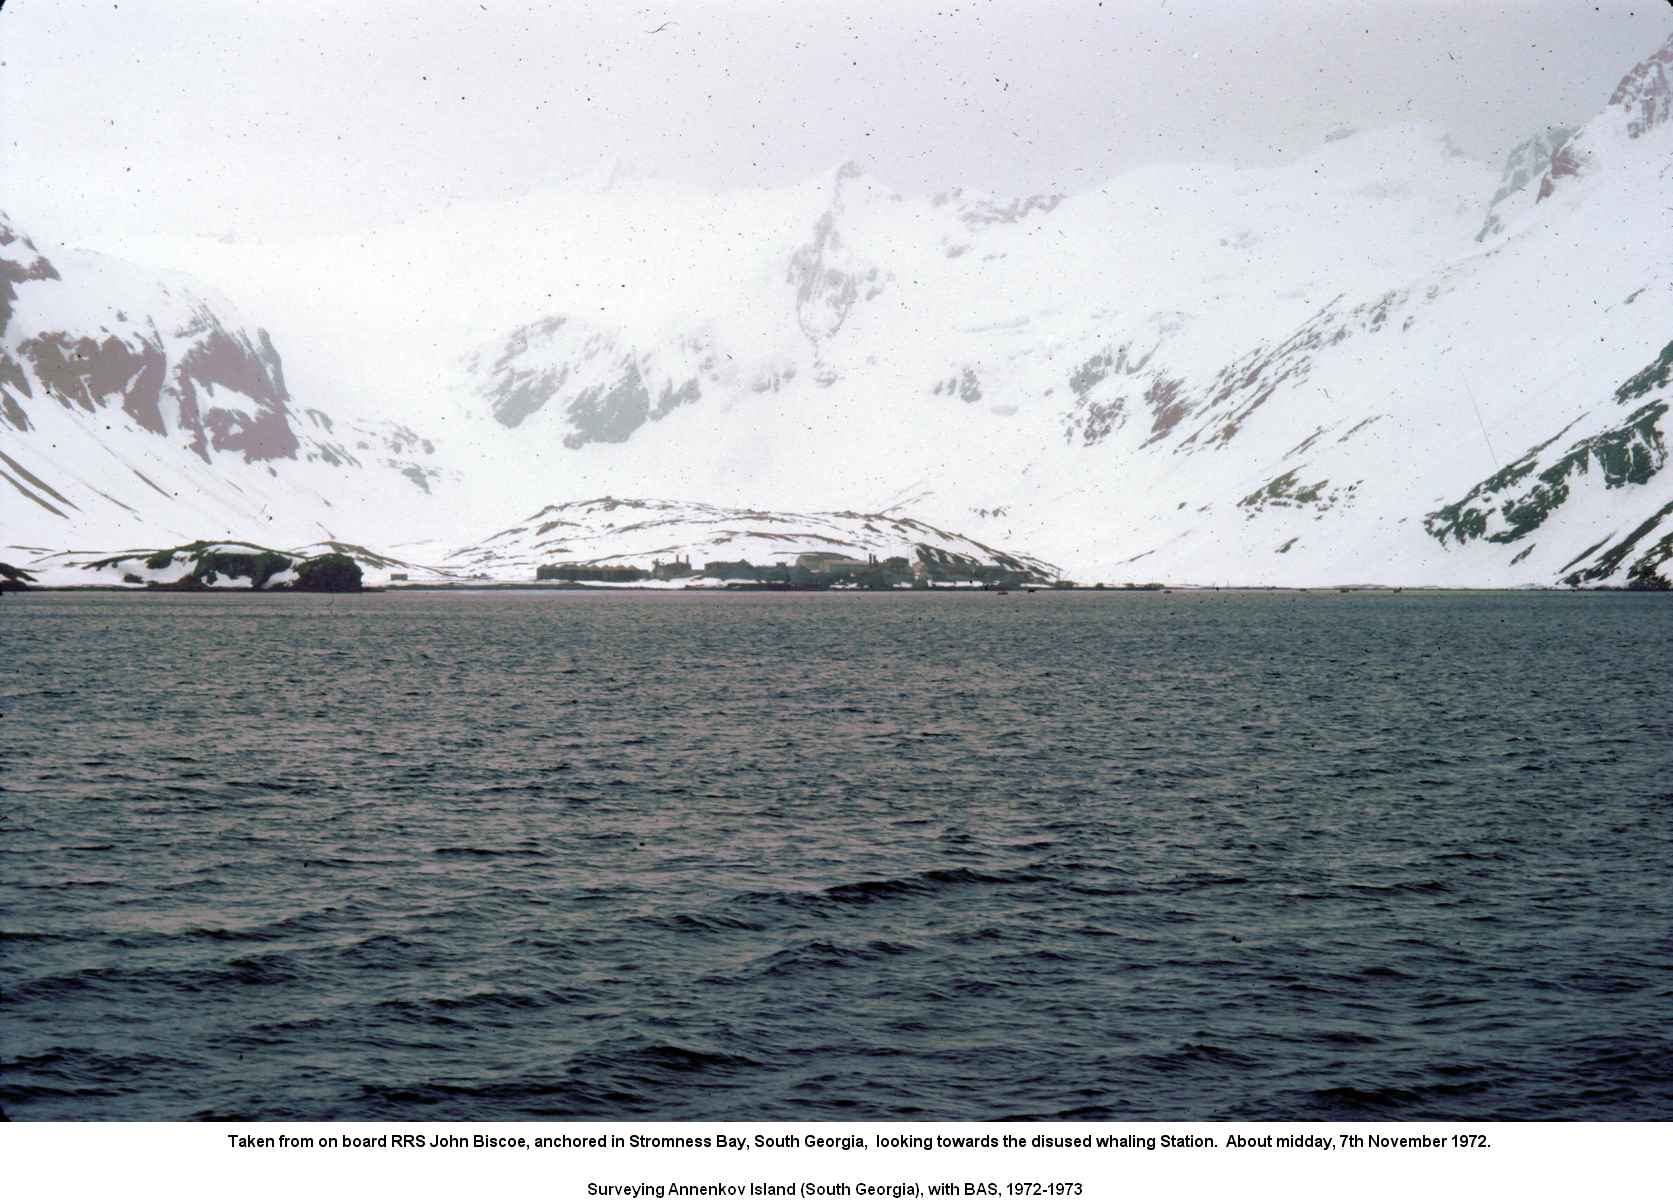 Taken from on board RRS John Biscoe, anchored in Stromness Bay, South Georgia, looking towards the disused whaling Station.  About midday, 7th November 1972.